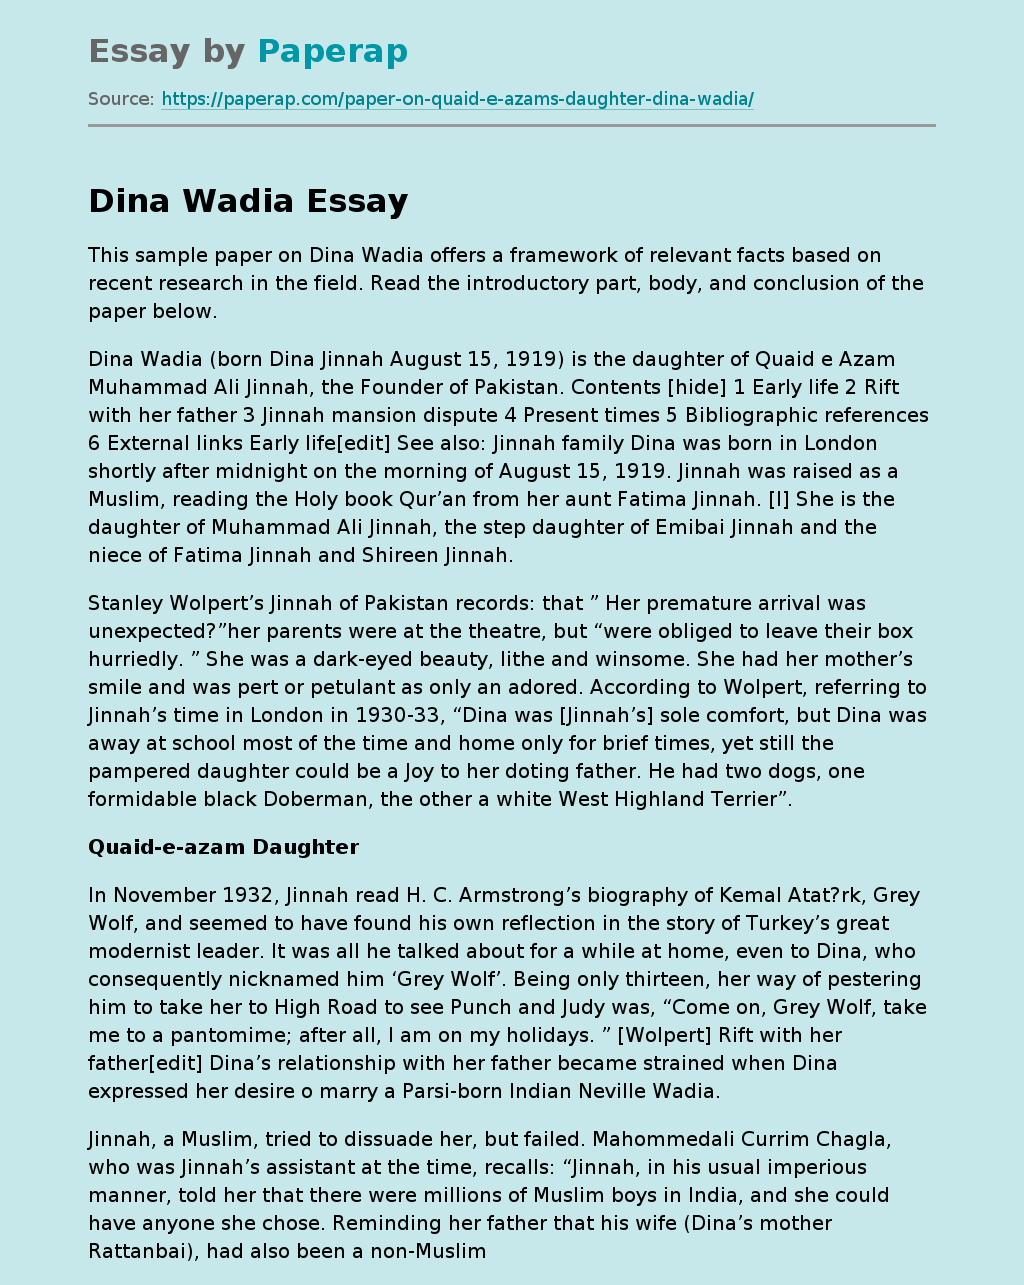 Dina Wadia: A Framework of Relevant Facts